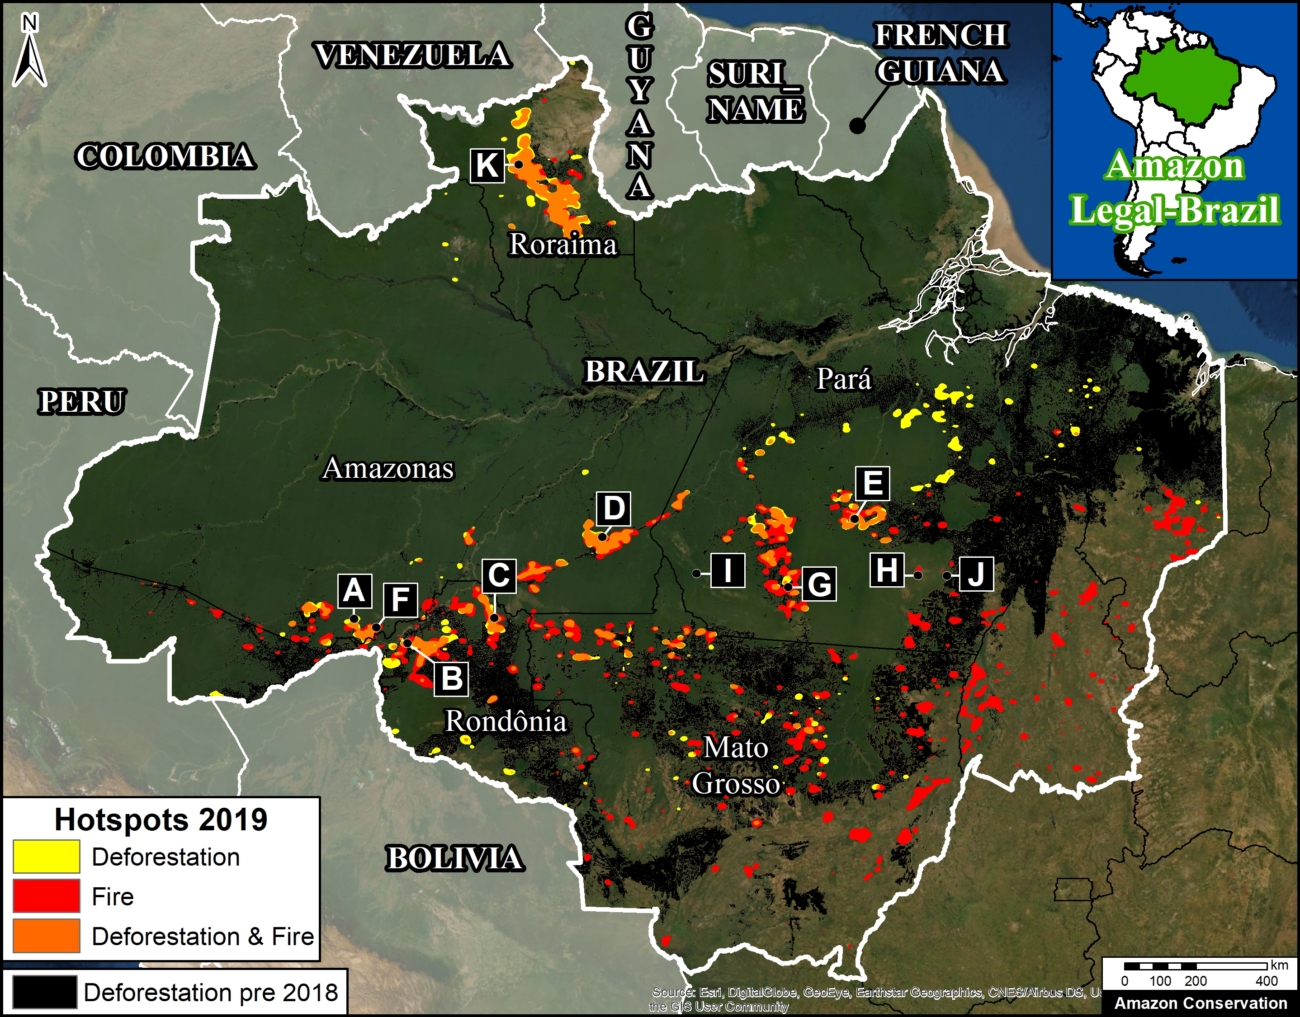 MAAP #109: Fires and Deforestation in the Brazilian Amazon, 2019 | MAAP